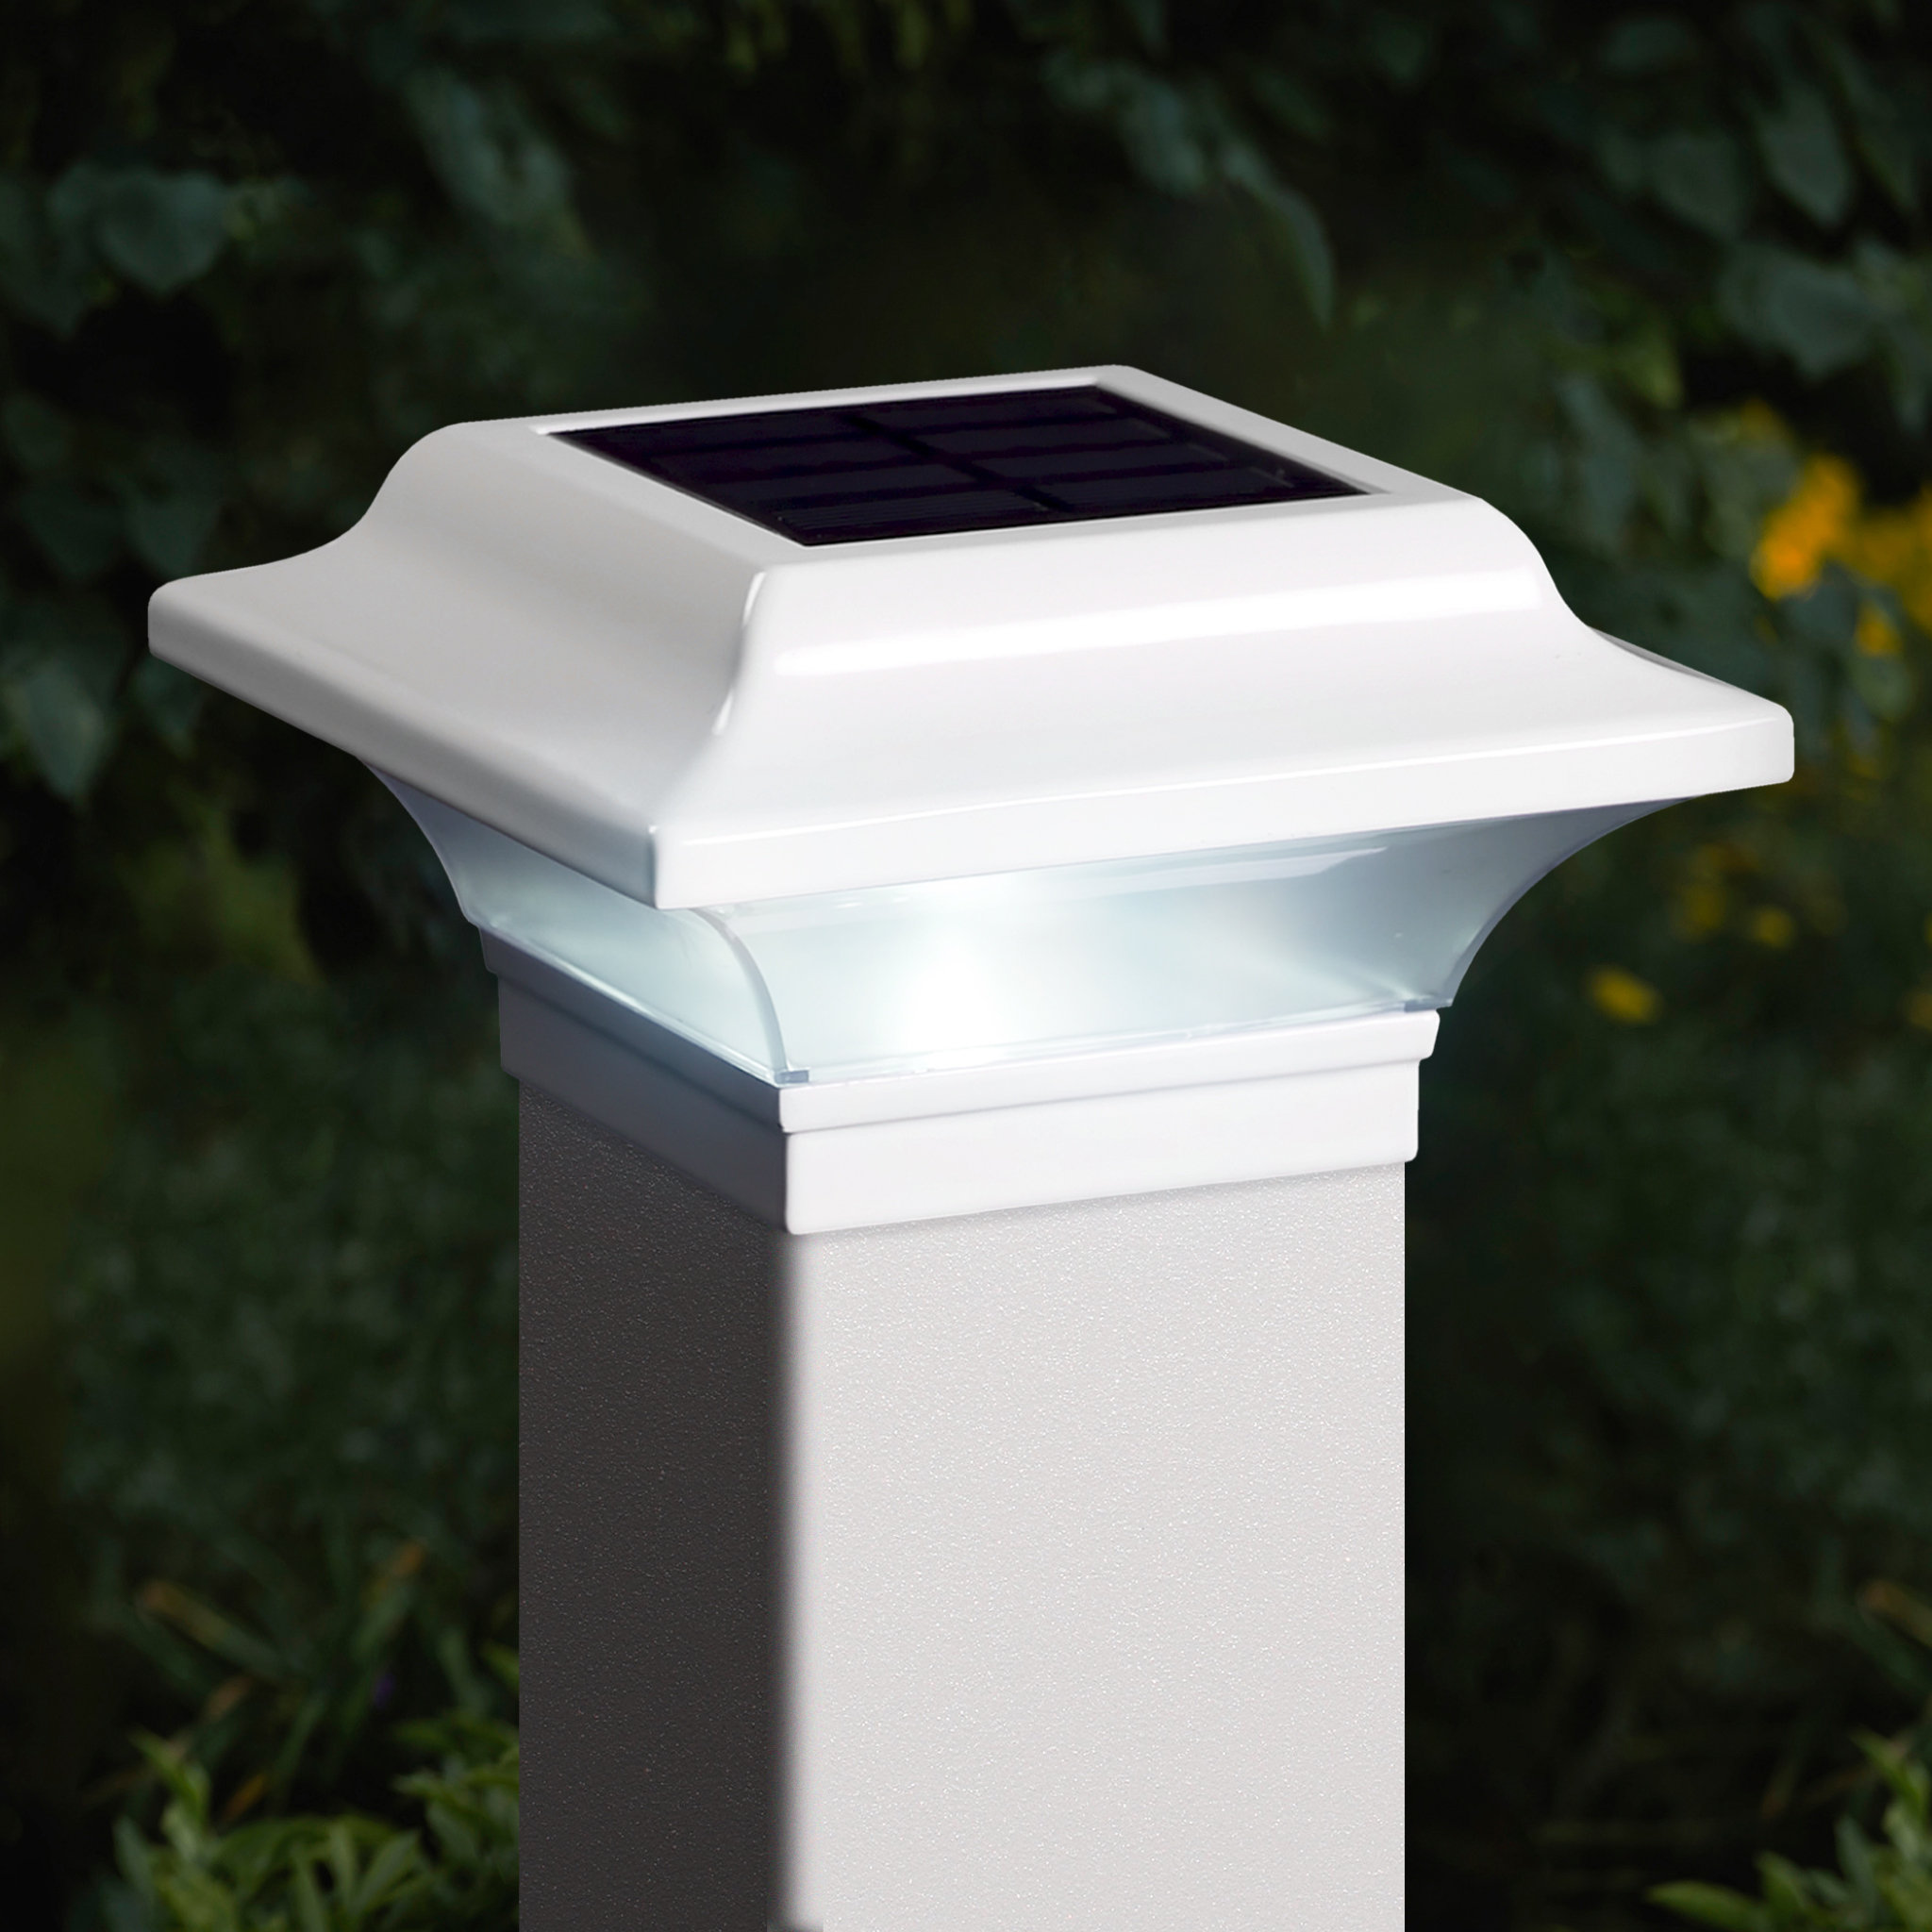 Classy Caps Imperial Solar Powered Integrated LED Metal 2.5 in. x 2.5 in.  Fence Post Cap Light with Base Adapter Included  Reviews Wayfair